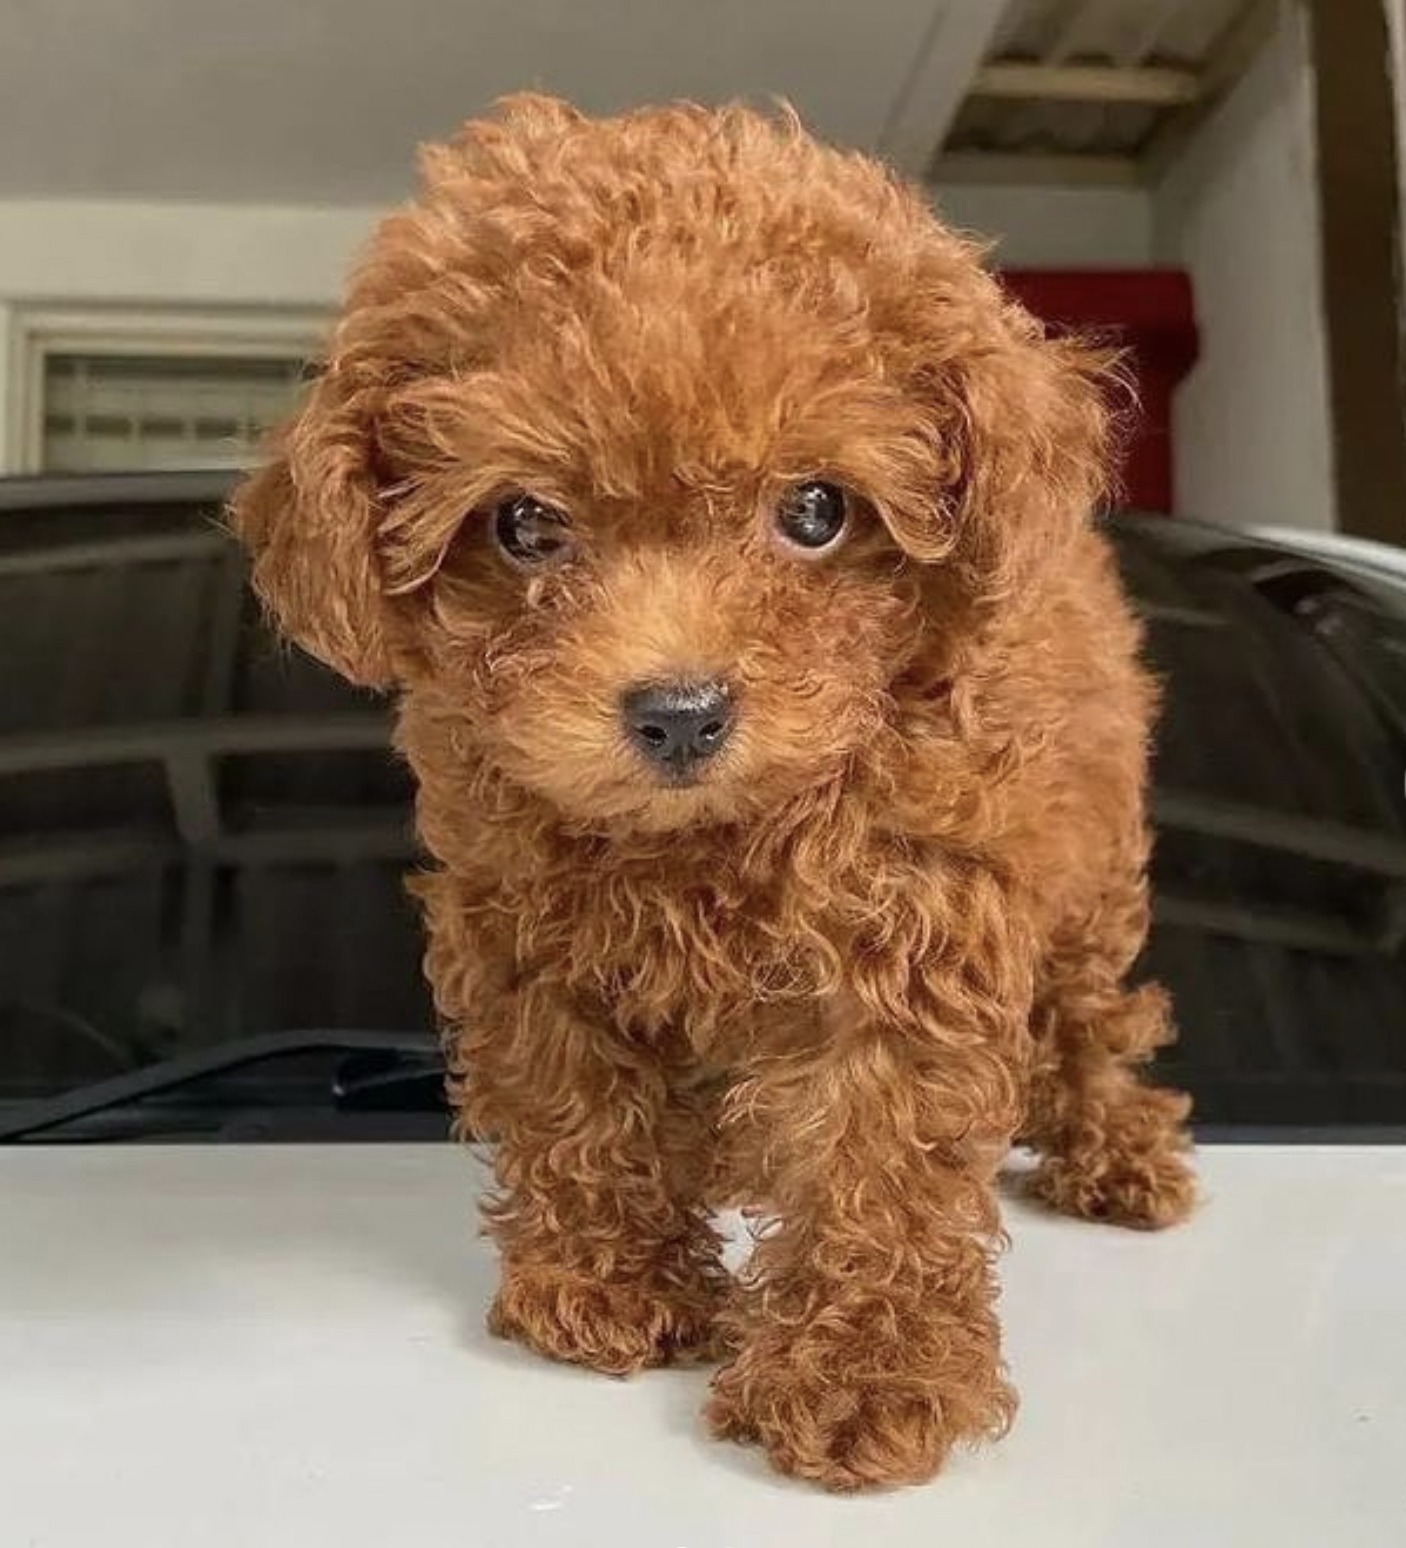 Teacup Poodle Full Grown Size